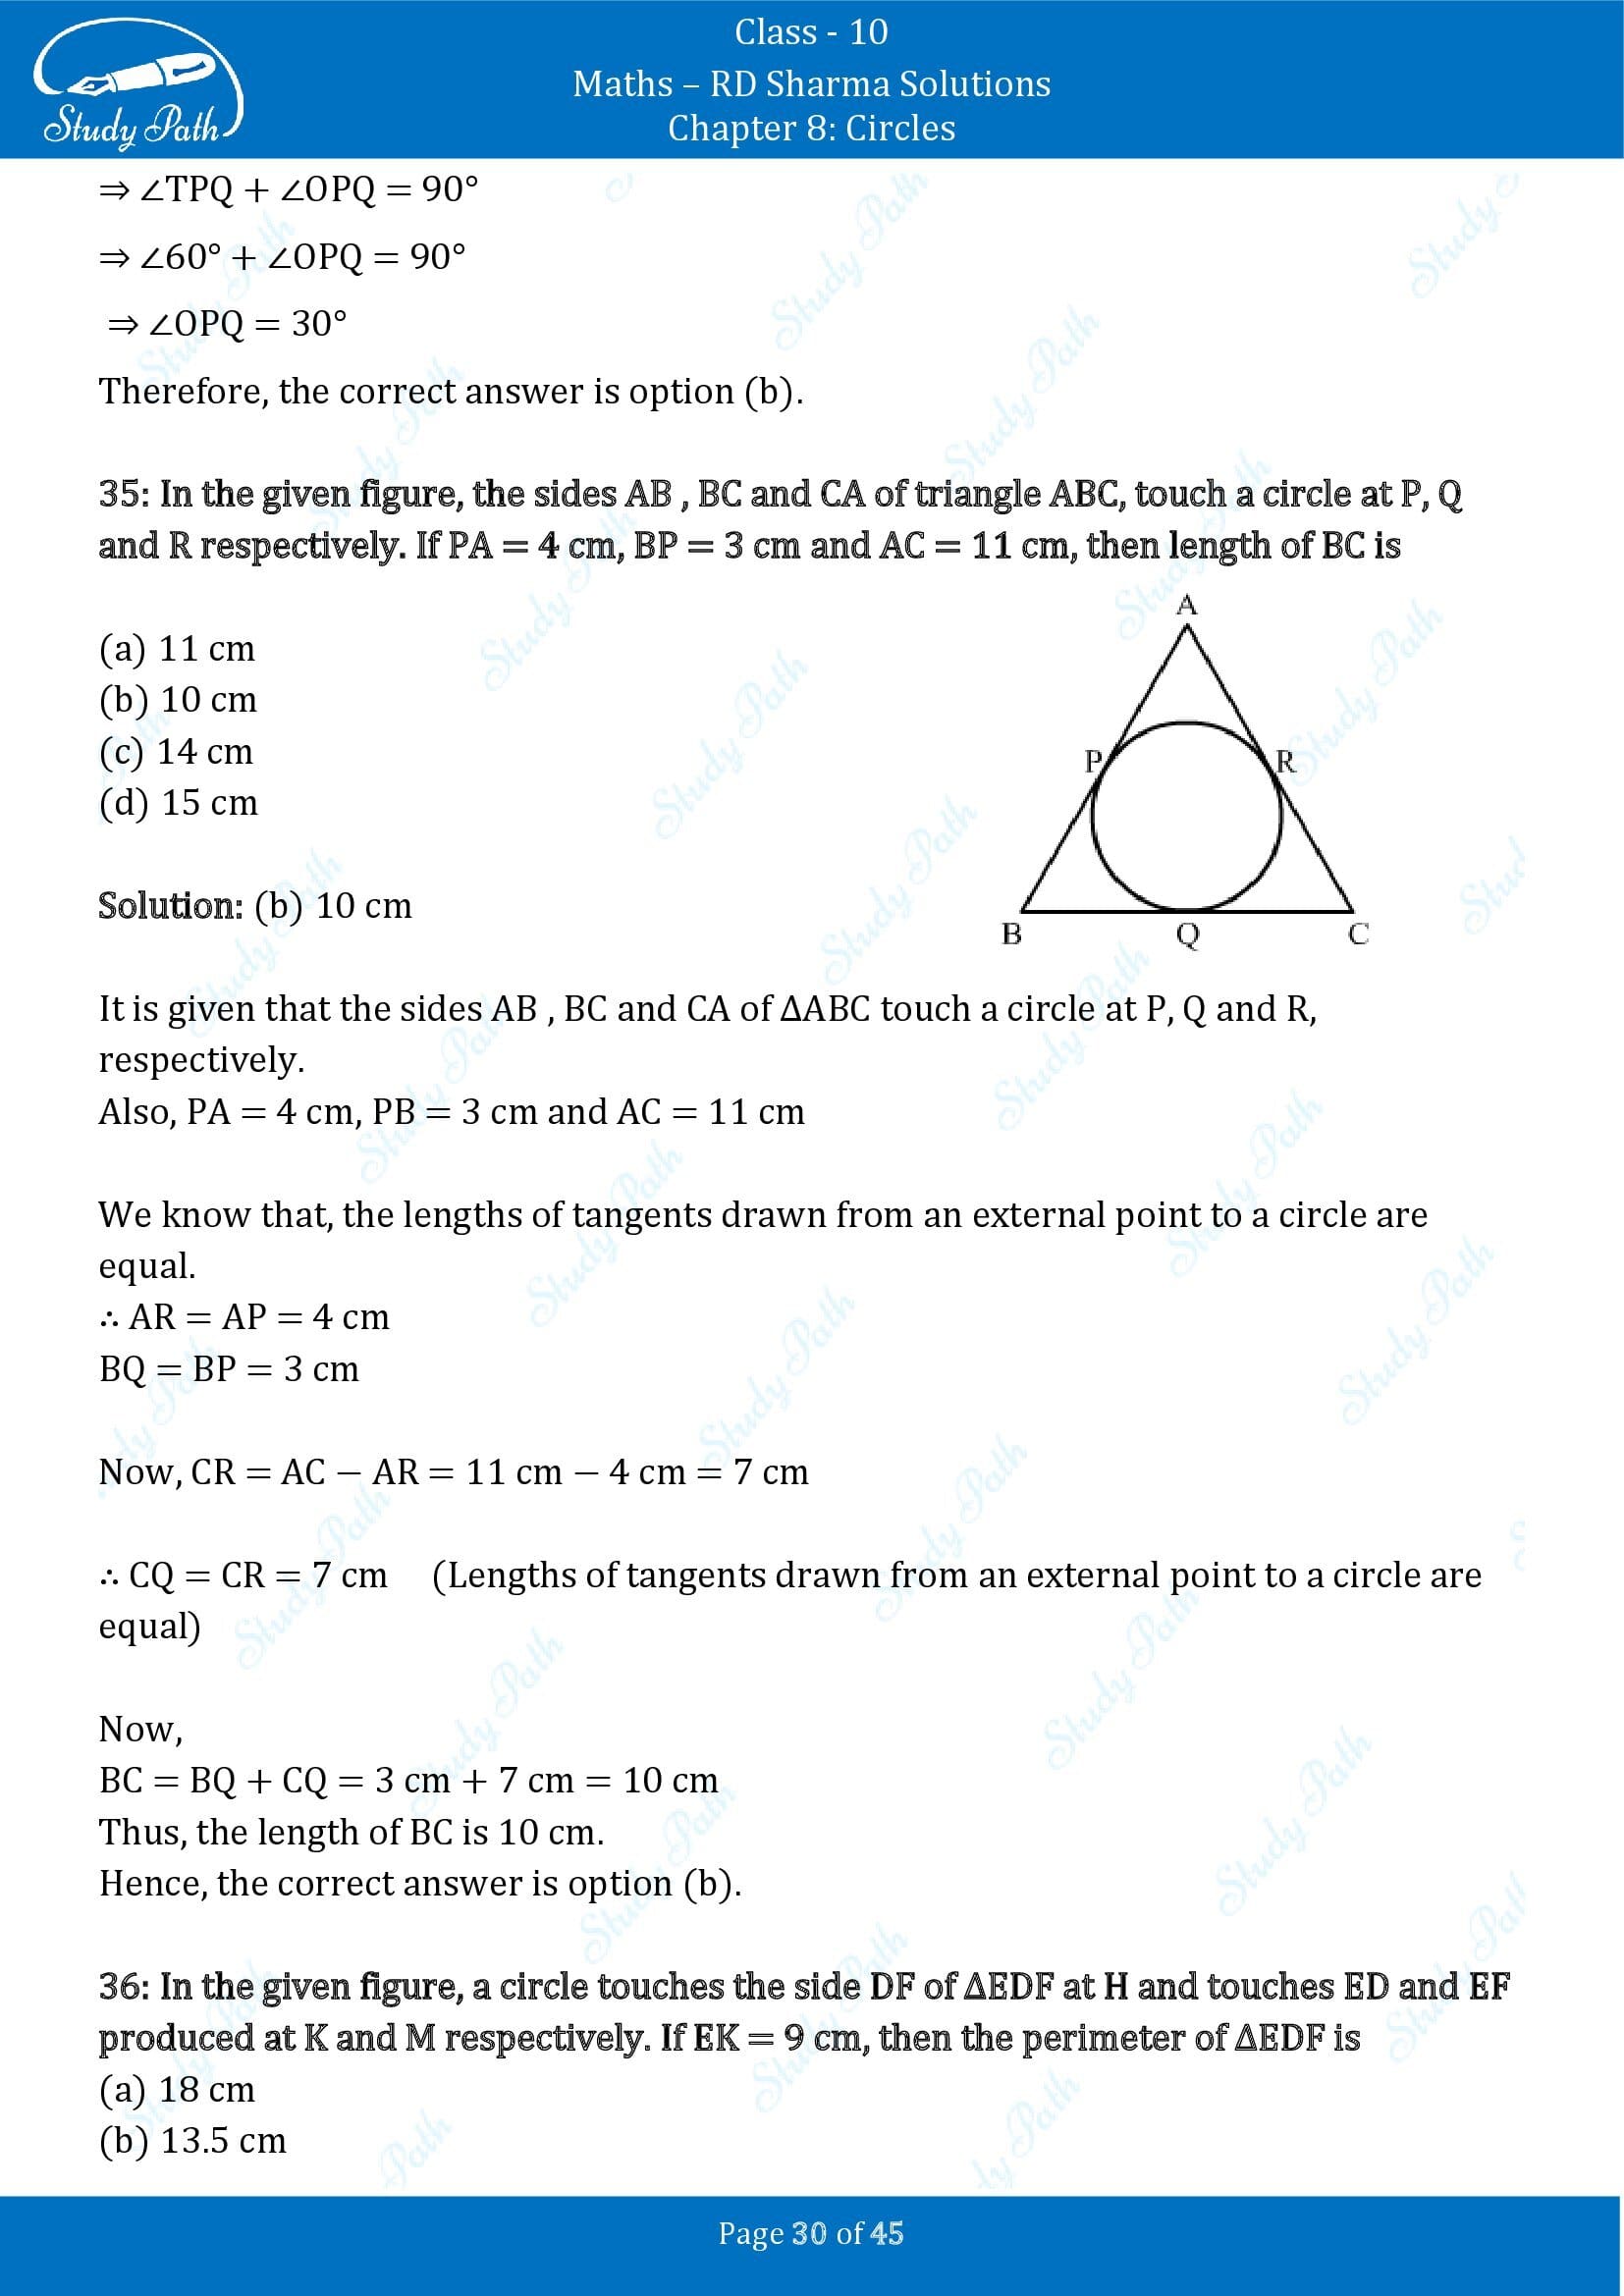 RD Sharma Solutions Class 10 Chapter 8 Circles Multiple Choice Questions MCQs 00030